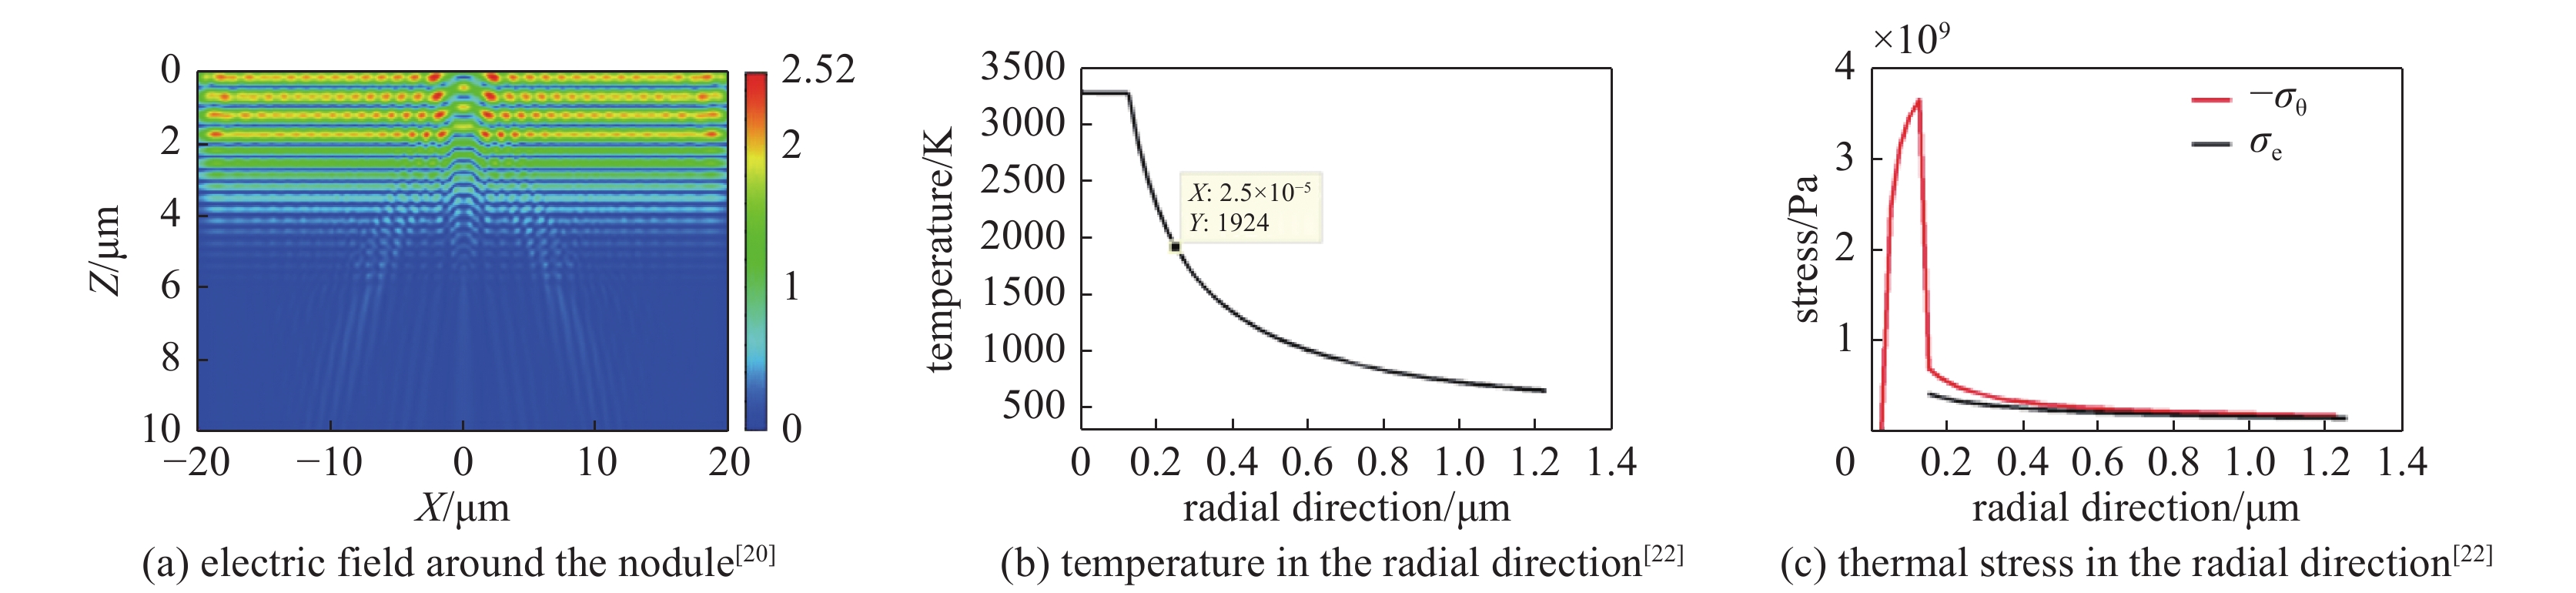 Distributions of electric field, temperature and thermal stress induced by the nodule